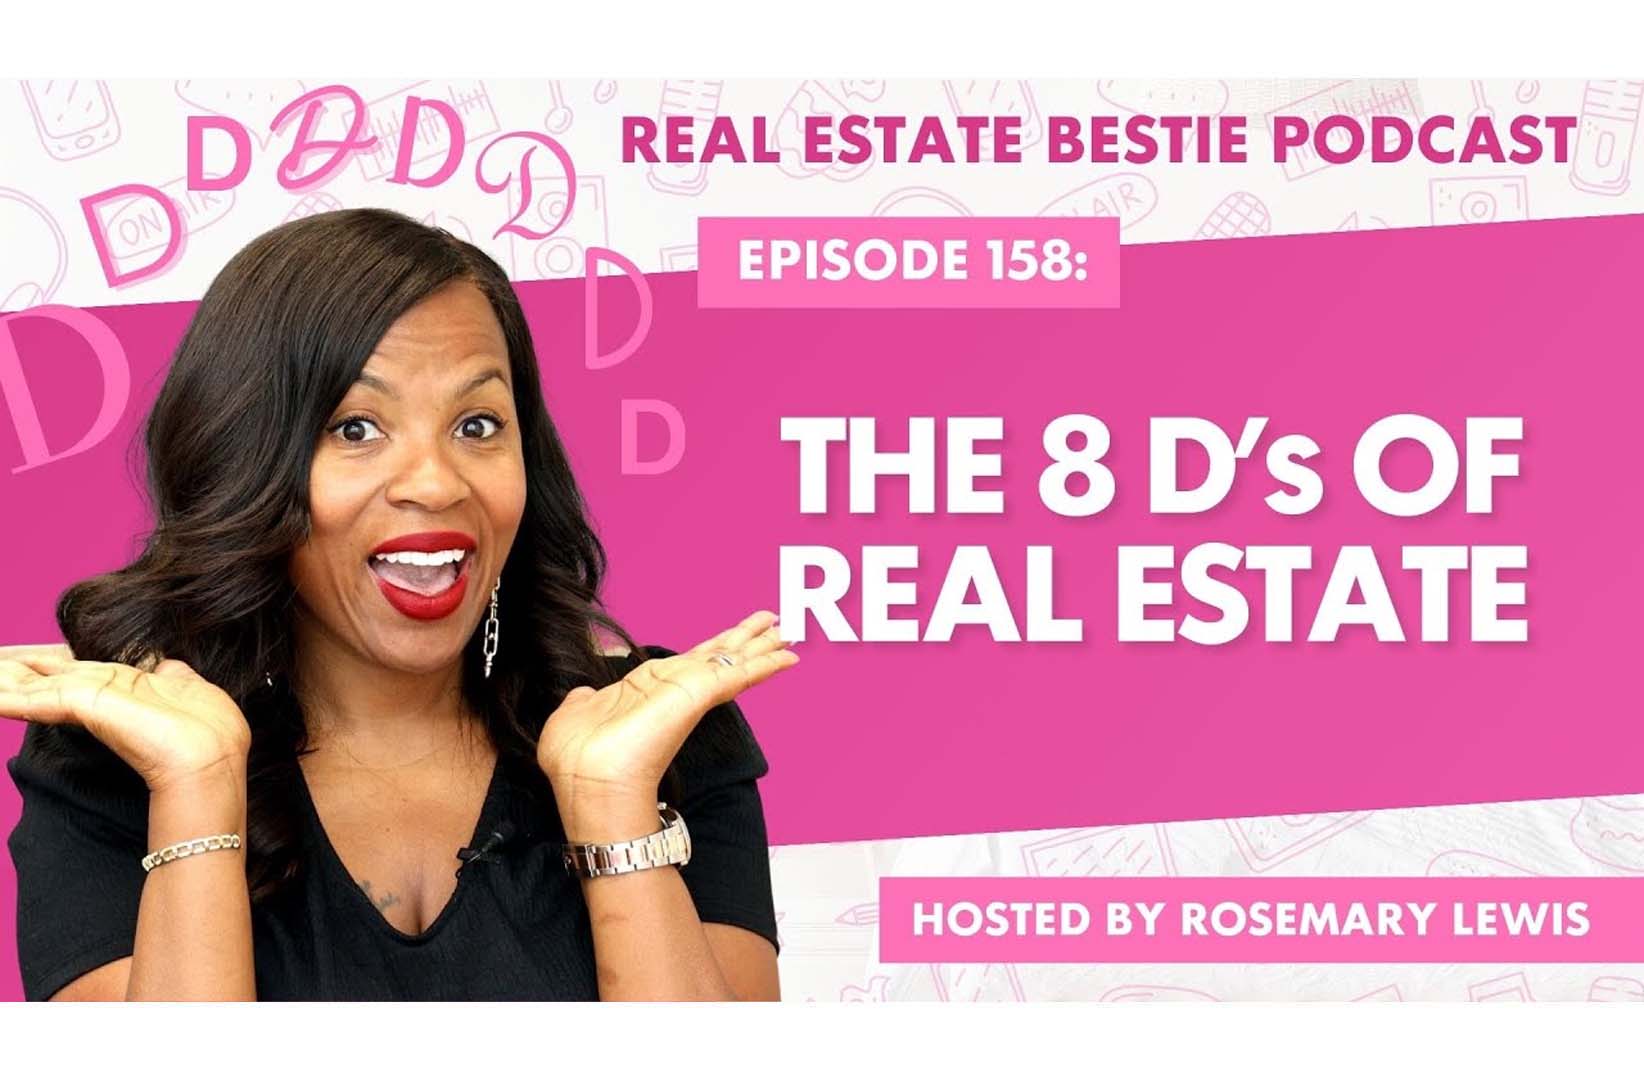 The 8 D's of Real Estate - Real Estate Bestie Podcast - Rosemary Lewis